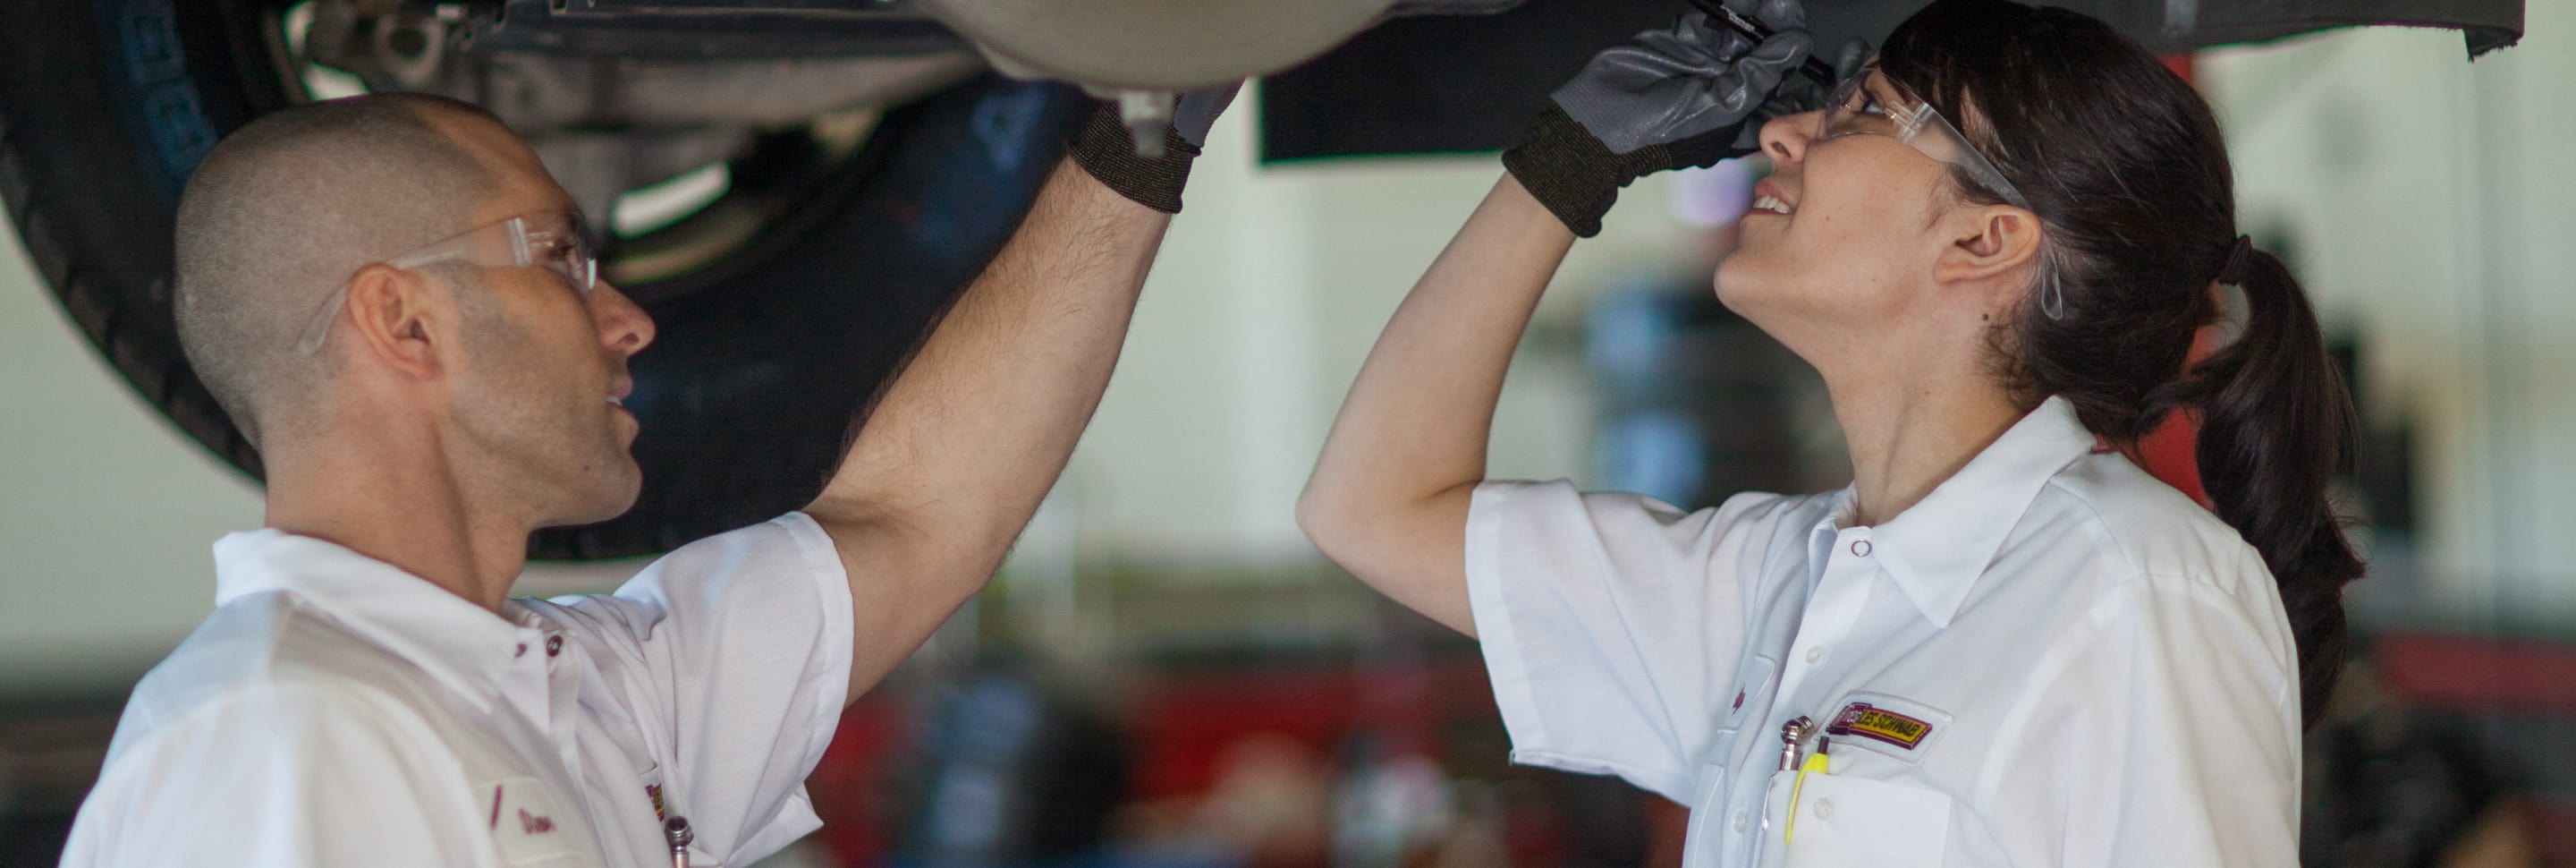 Two Les Schwab technicians examine one of the calipers of a car while it's on a lift.